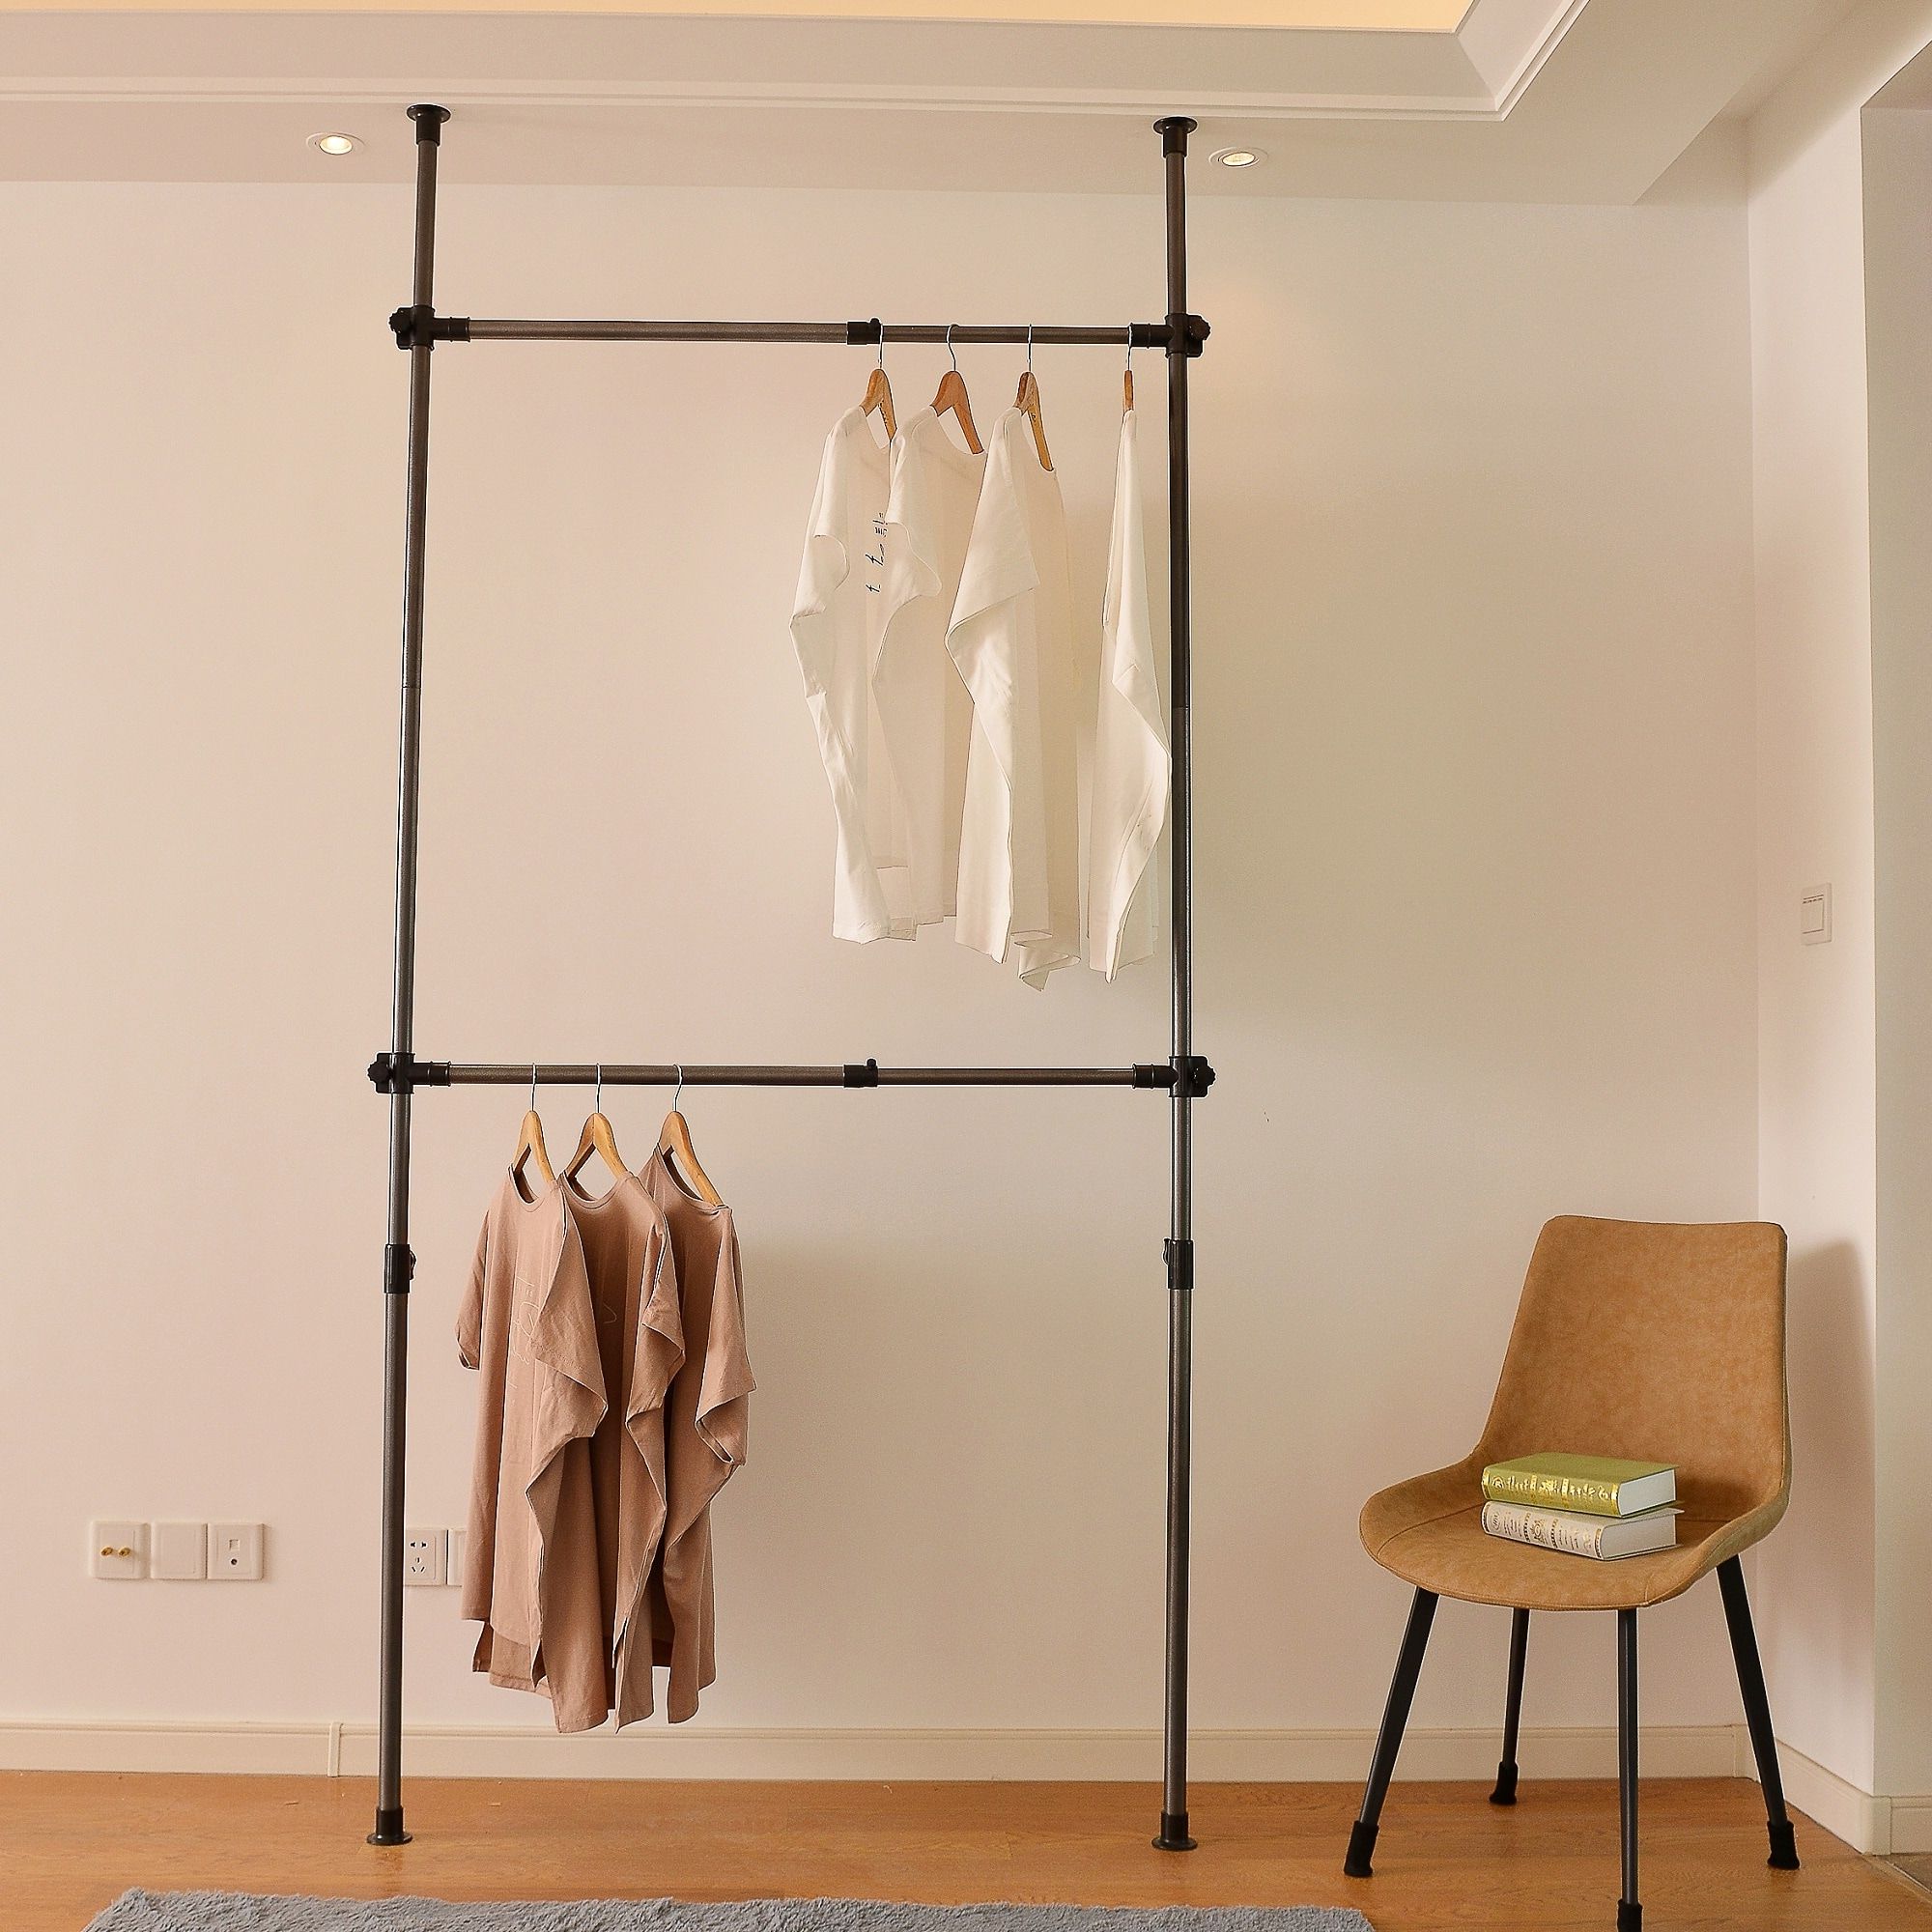 Adjustable Clothing Rack Double Rod Clothing Rack 2 Tier Clothes Rack  Adjustable Hanger For Hanging Clothes Closet Rack – Bed Bath & Beyond –  36079003 Within 2 Tier Adjustable Wardrobes (View 18 of 20)